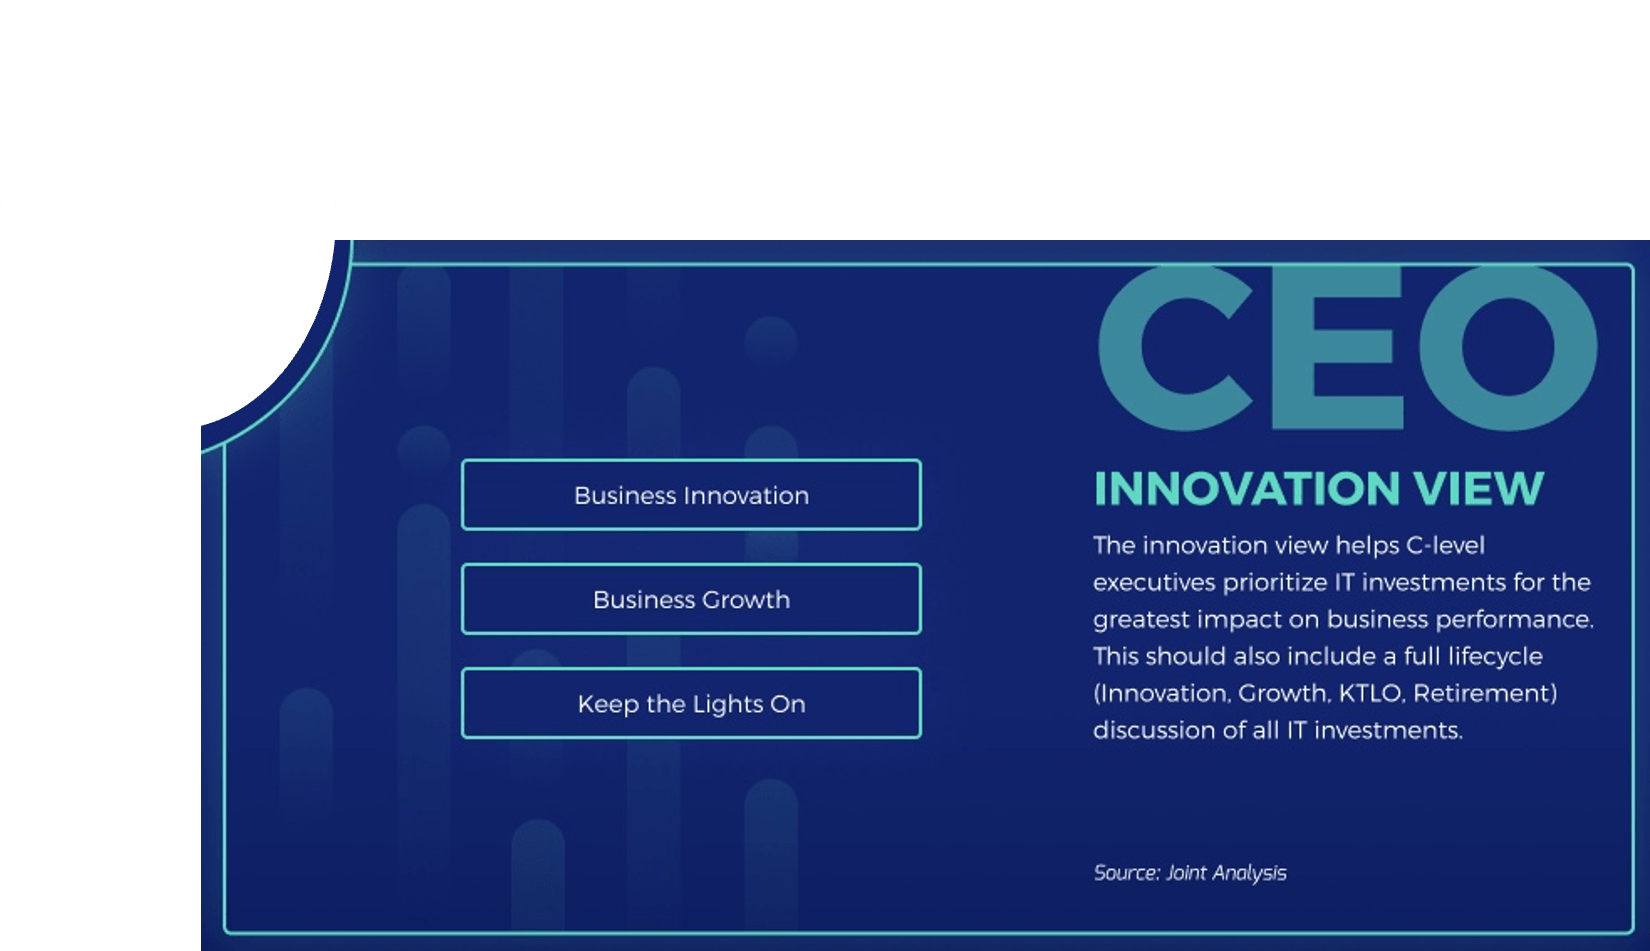 The image contains a screenshot of the CEO innovation view.